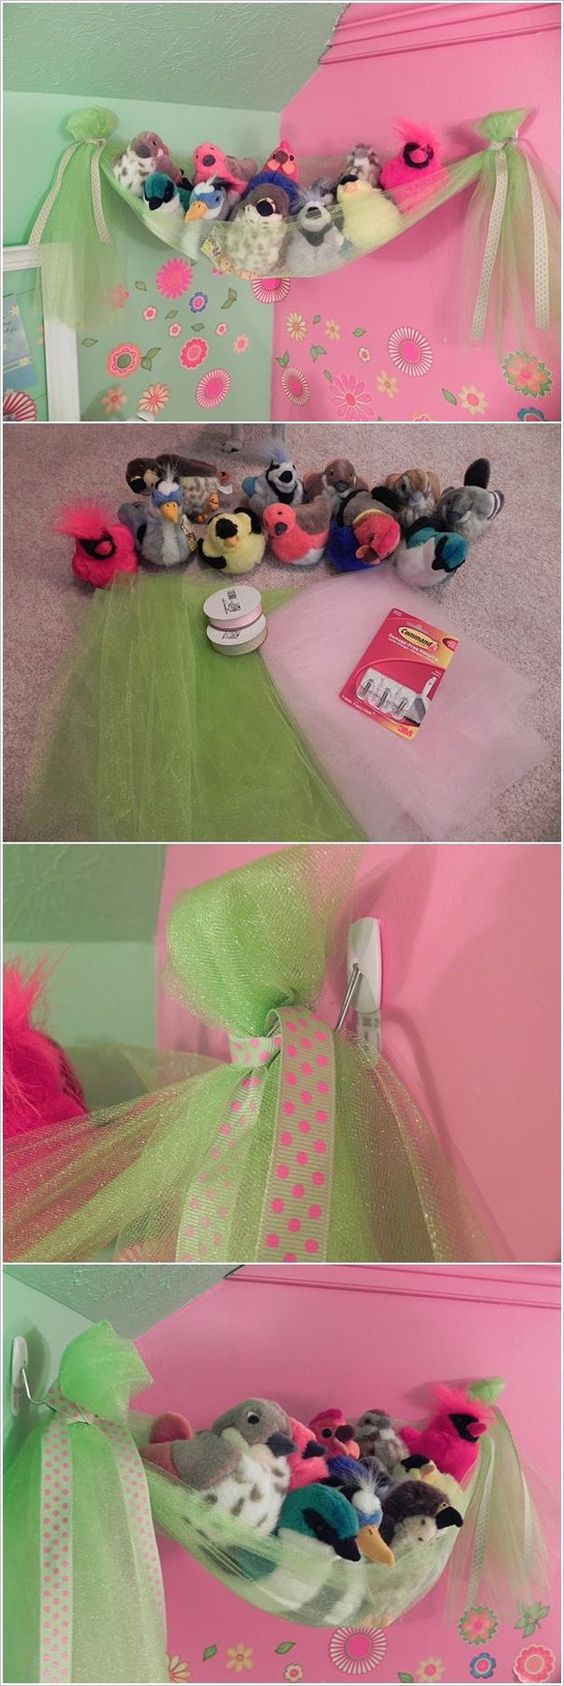 This Fancy Bird’s Nest is a Super Easy Stuffed Toy Storage for Girls' Room 